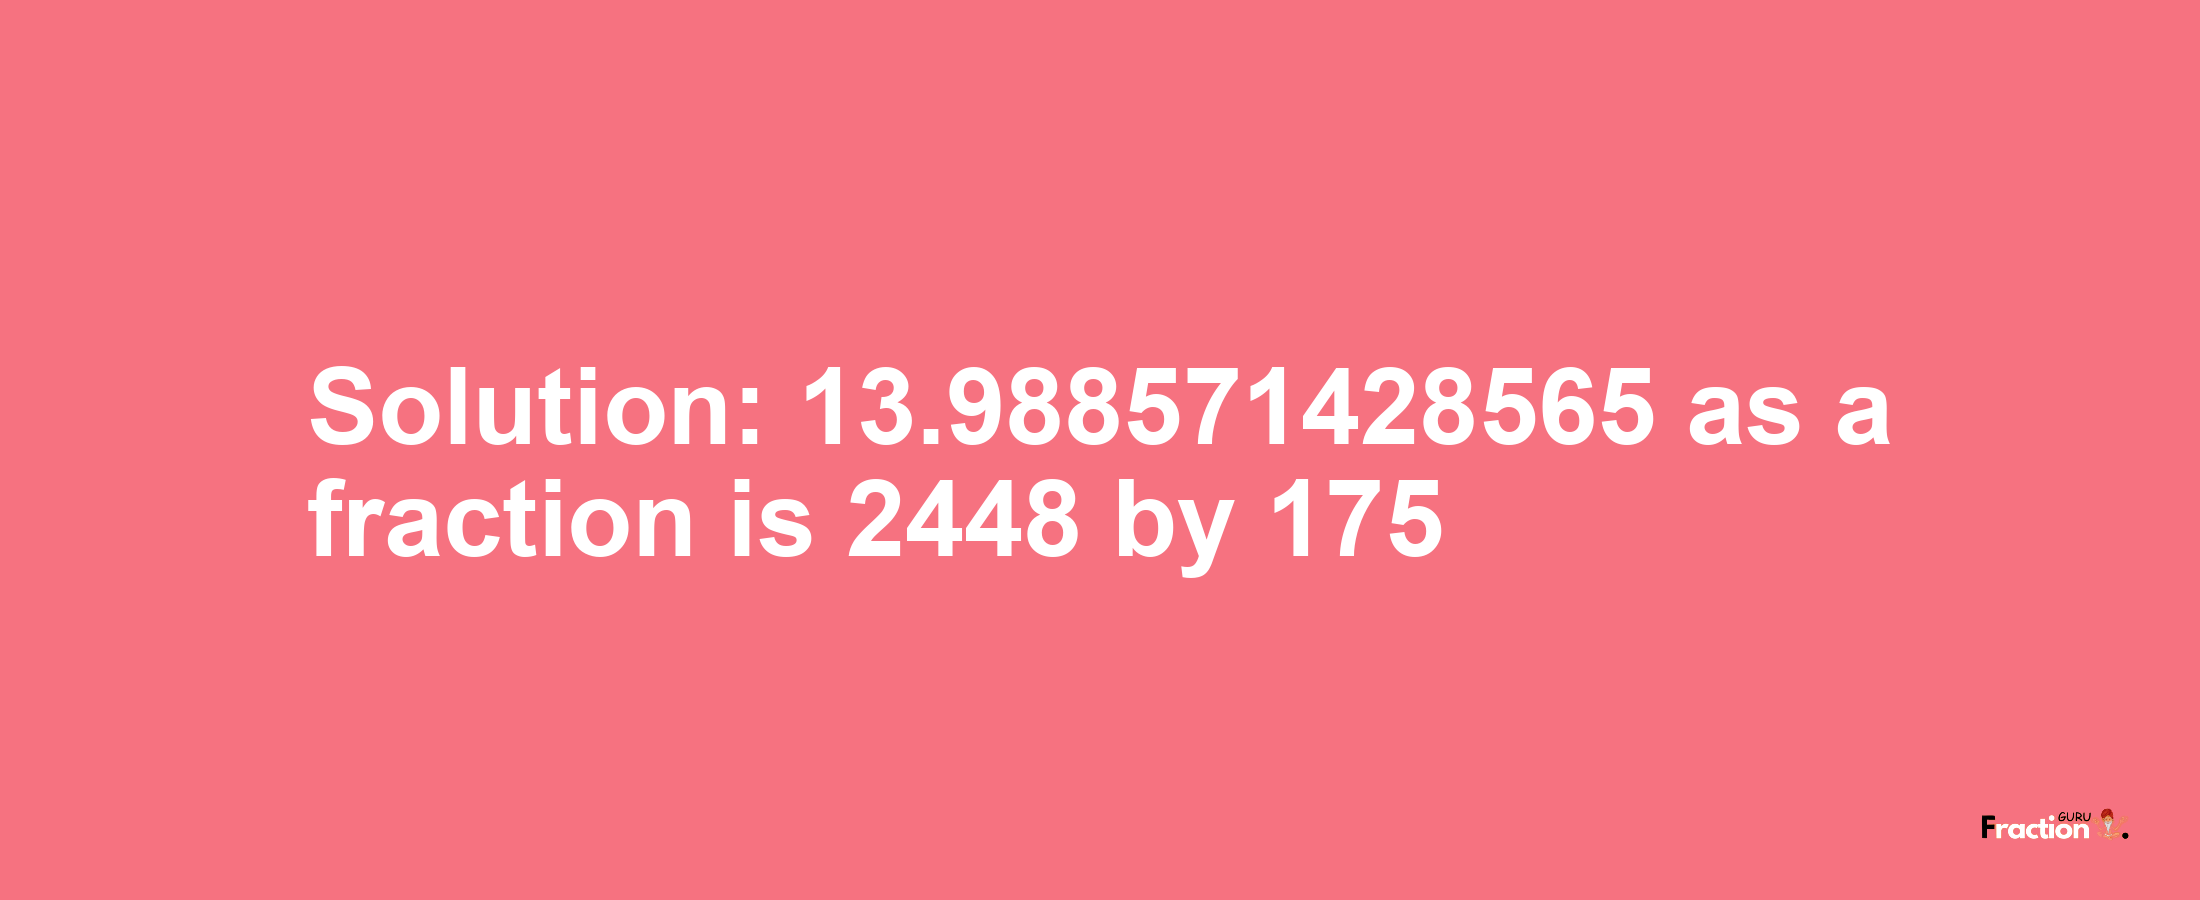 Solution:13.988571428565 as a fraction is 2448/175